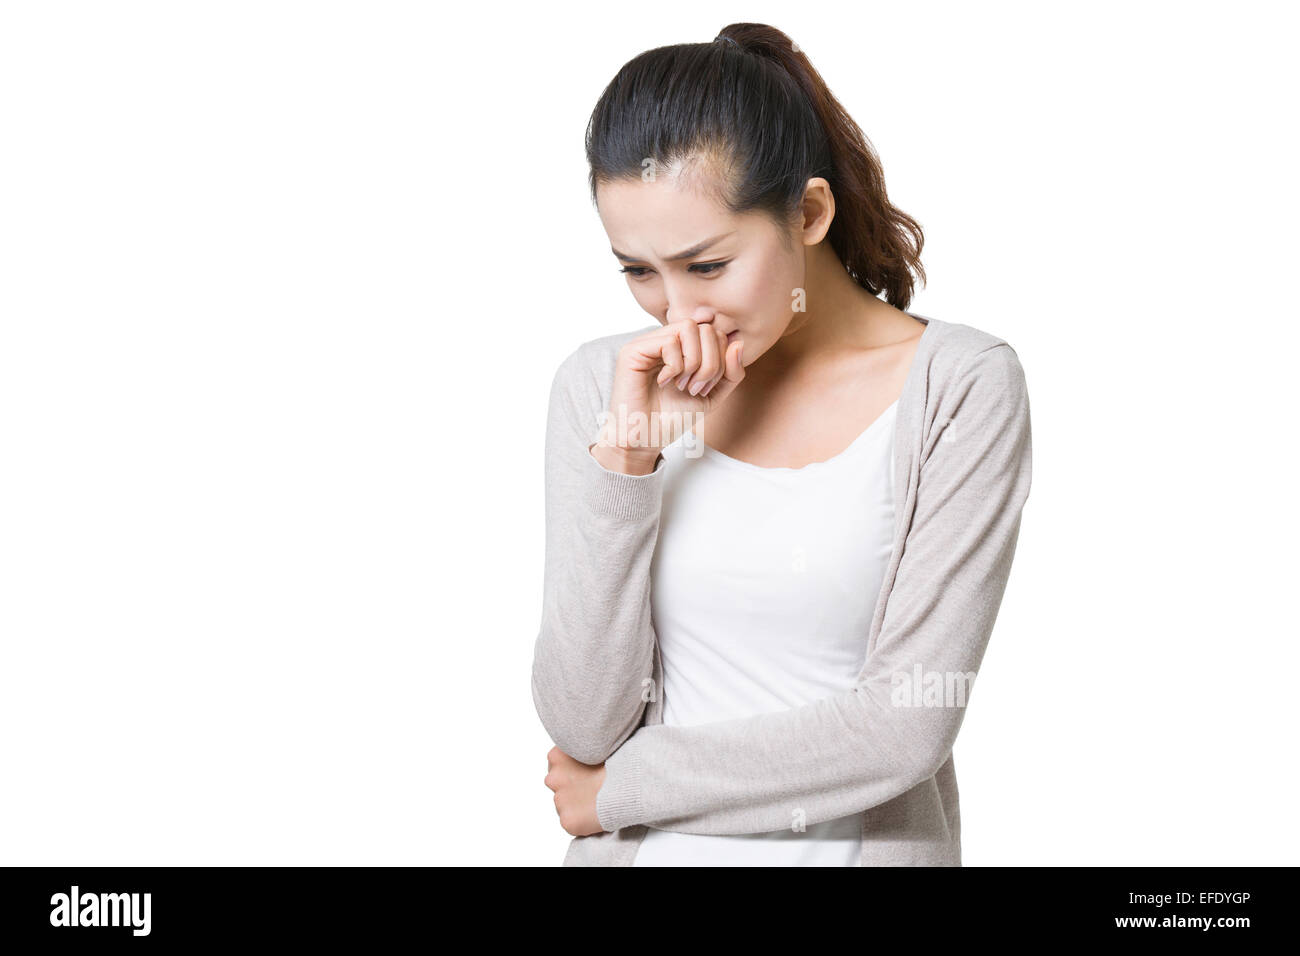 Young woman crying Stock Photo